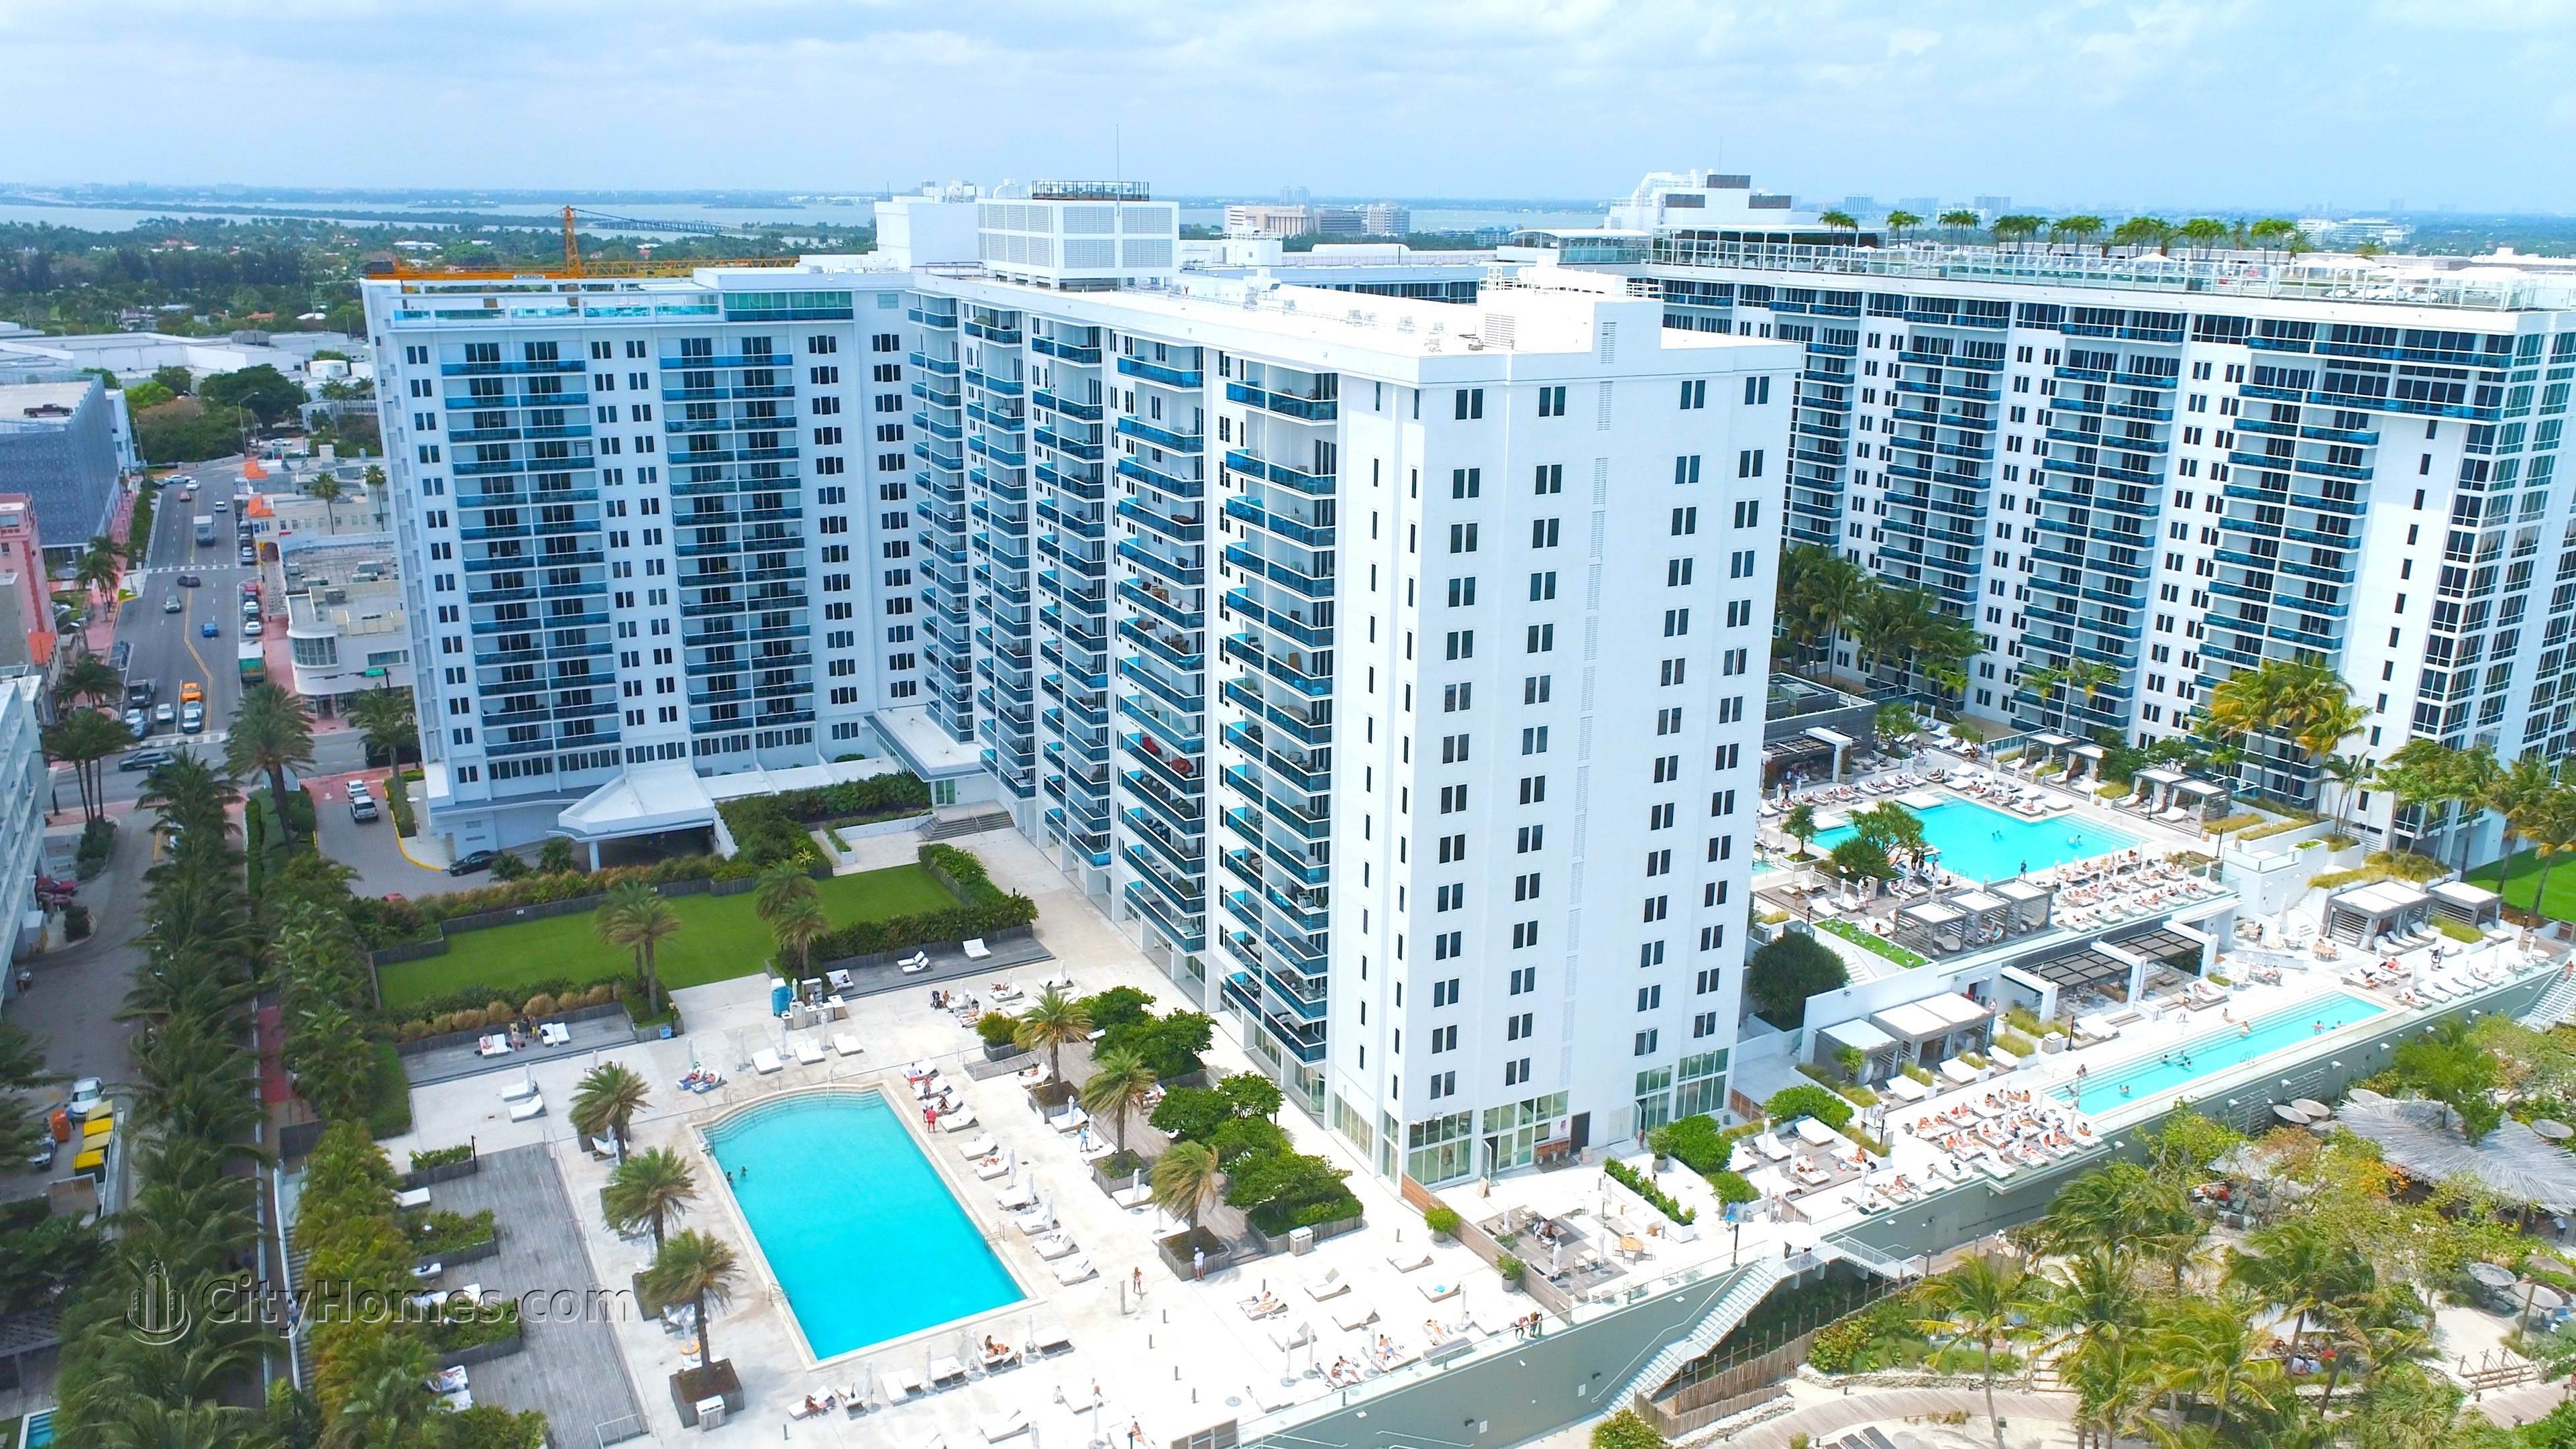 RONEY PALACE xây dựng tại 2301 Collins Ave, Mid Beach, Miami Beach, FL 33139